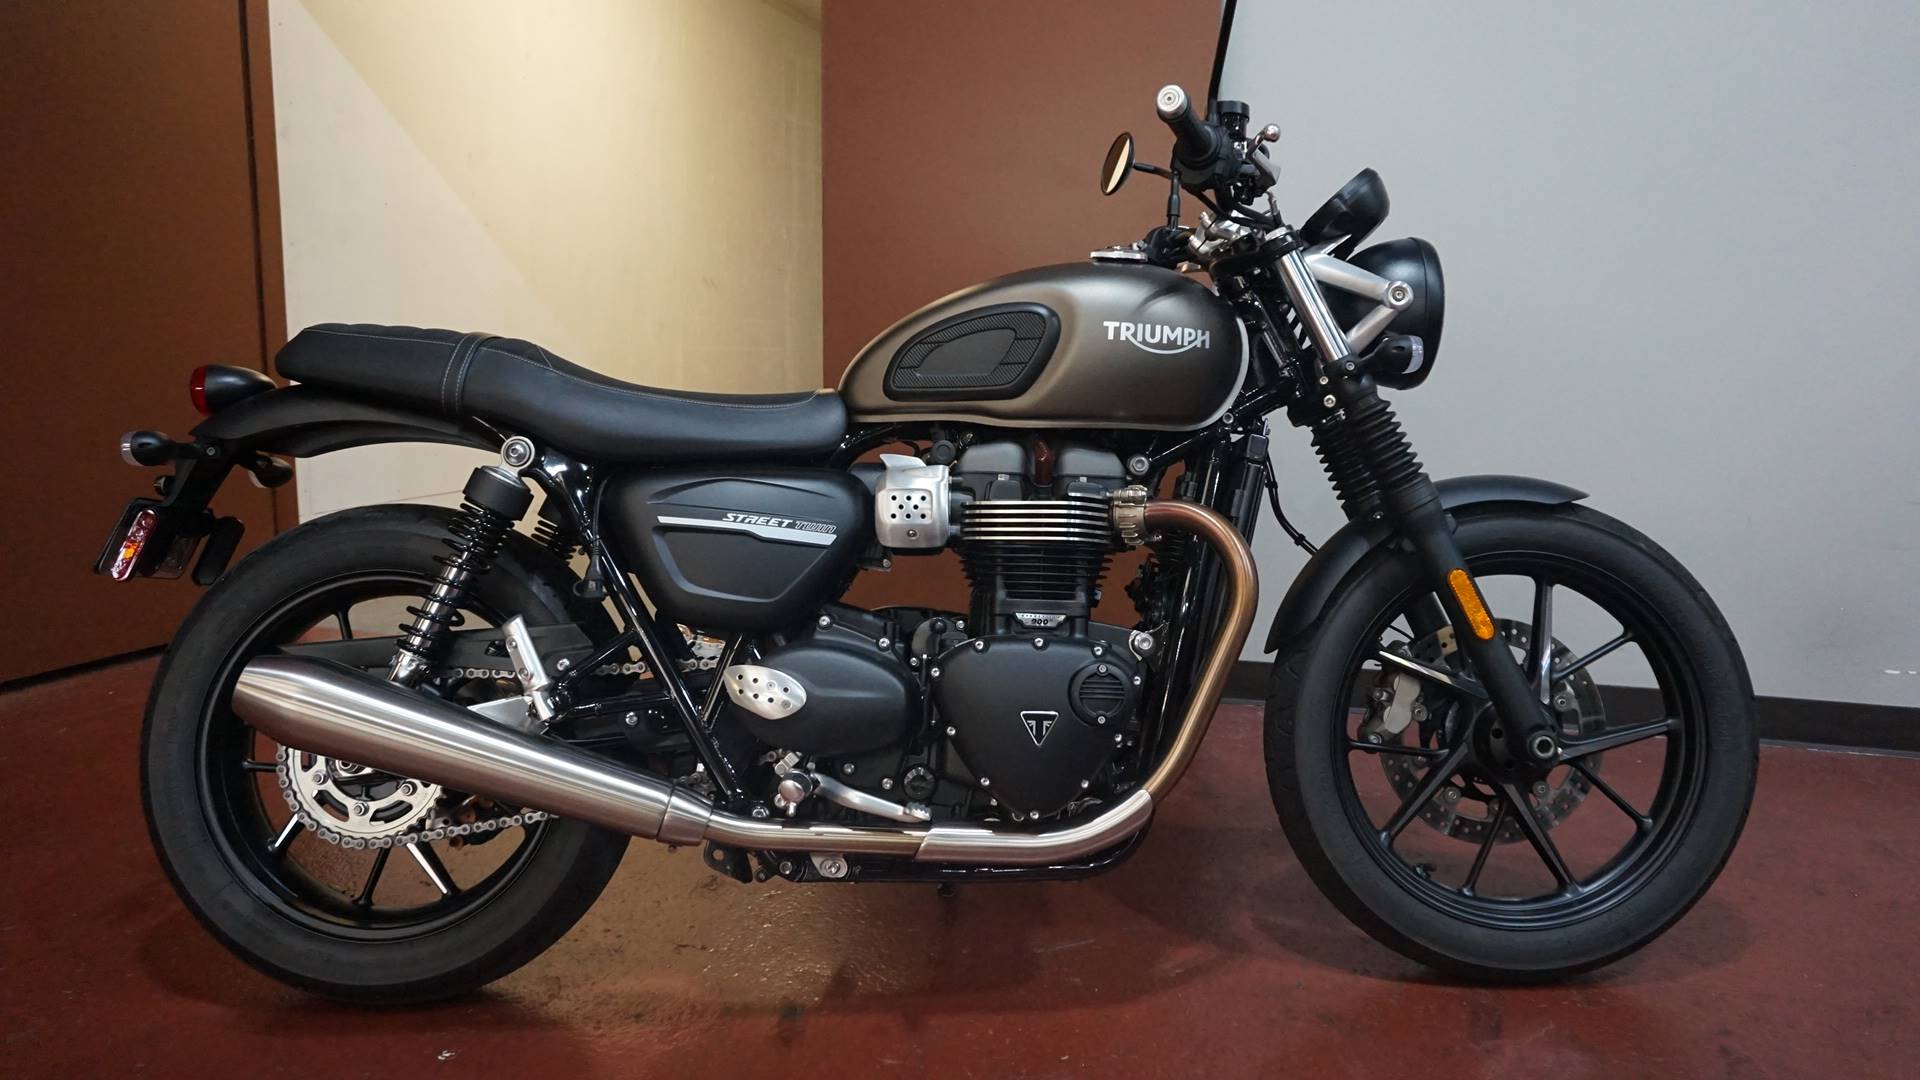 Used 2019 Triumph Street Twin 900 Motorcycles in Racine, WI | Stock ...